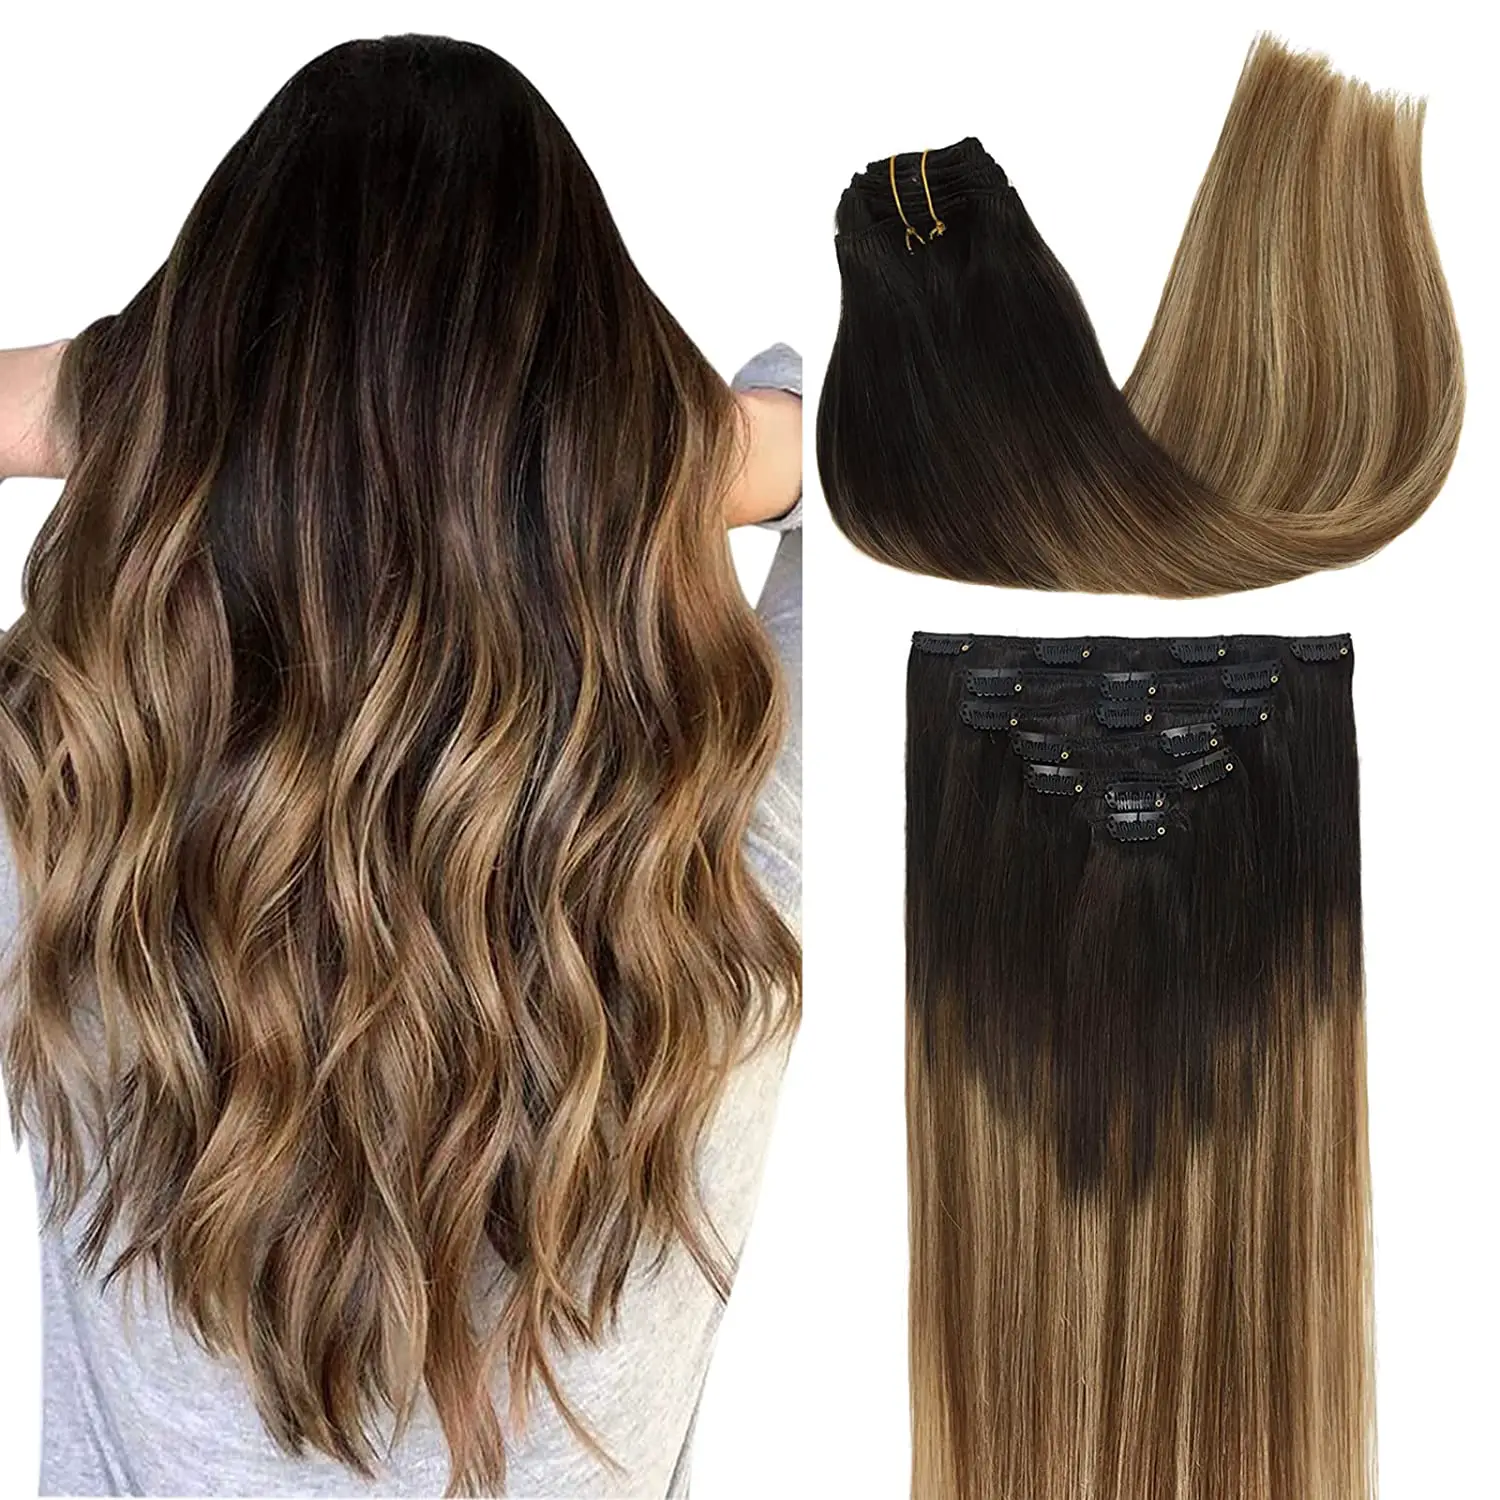 DOORES clip in hair extensions real human hair Balayage Dark Brown Fading to Chestnut Brown and Dirty Blonde 20 Inch 7pcs 120g Real Hair Extensions Straight Extensions Human Hair Natural